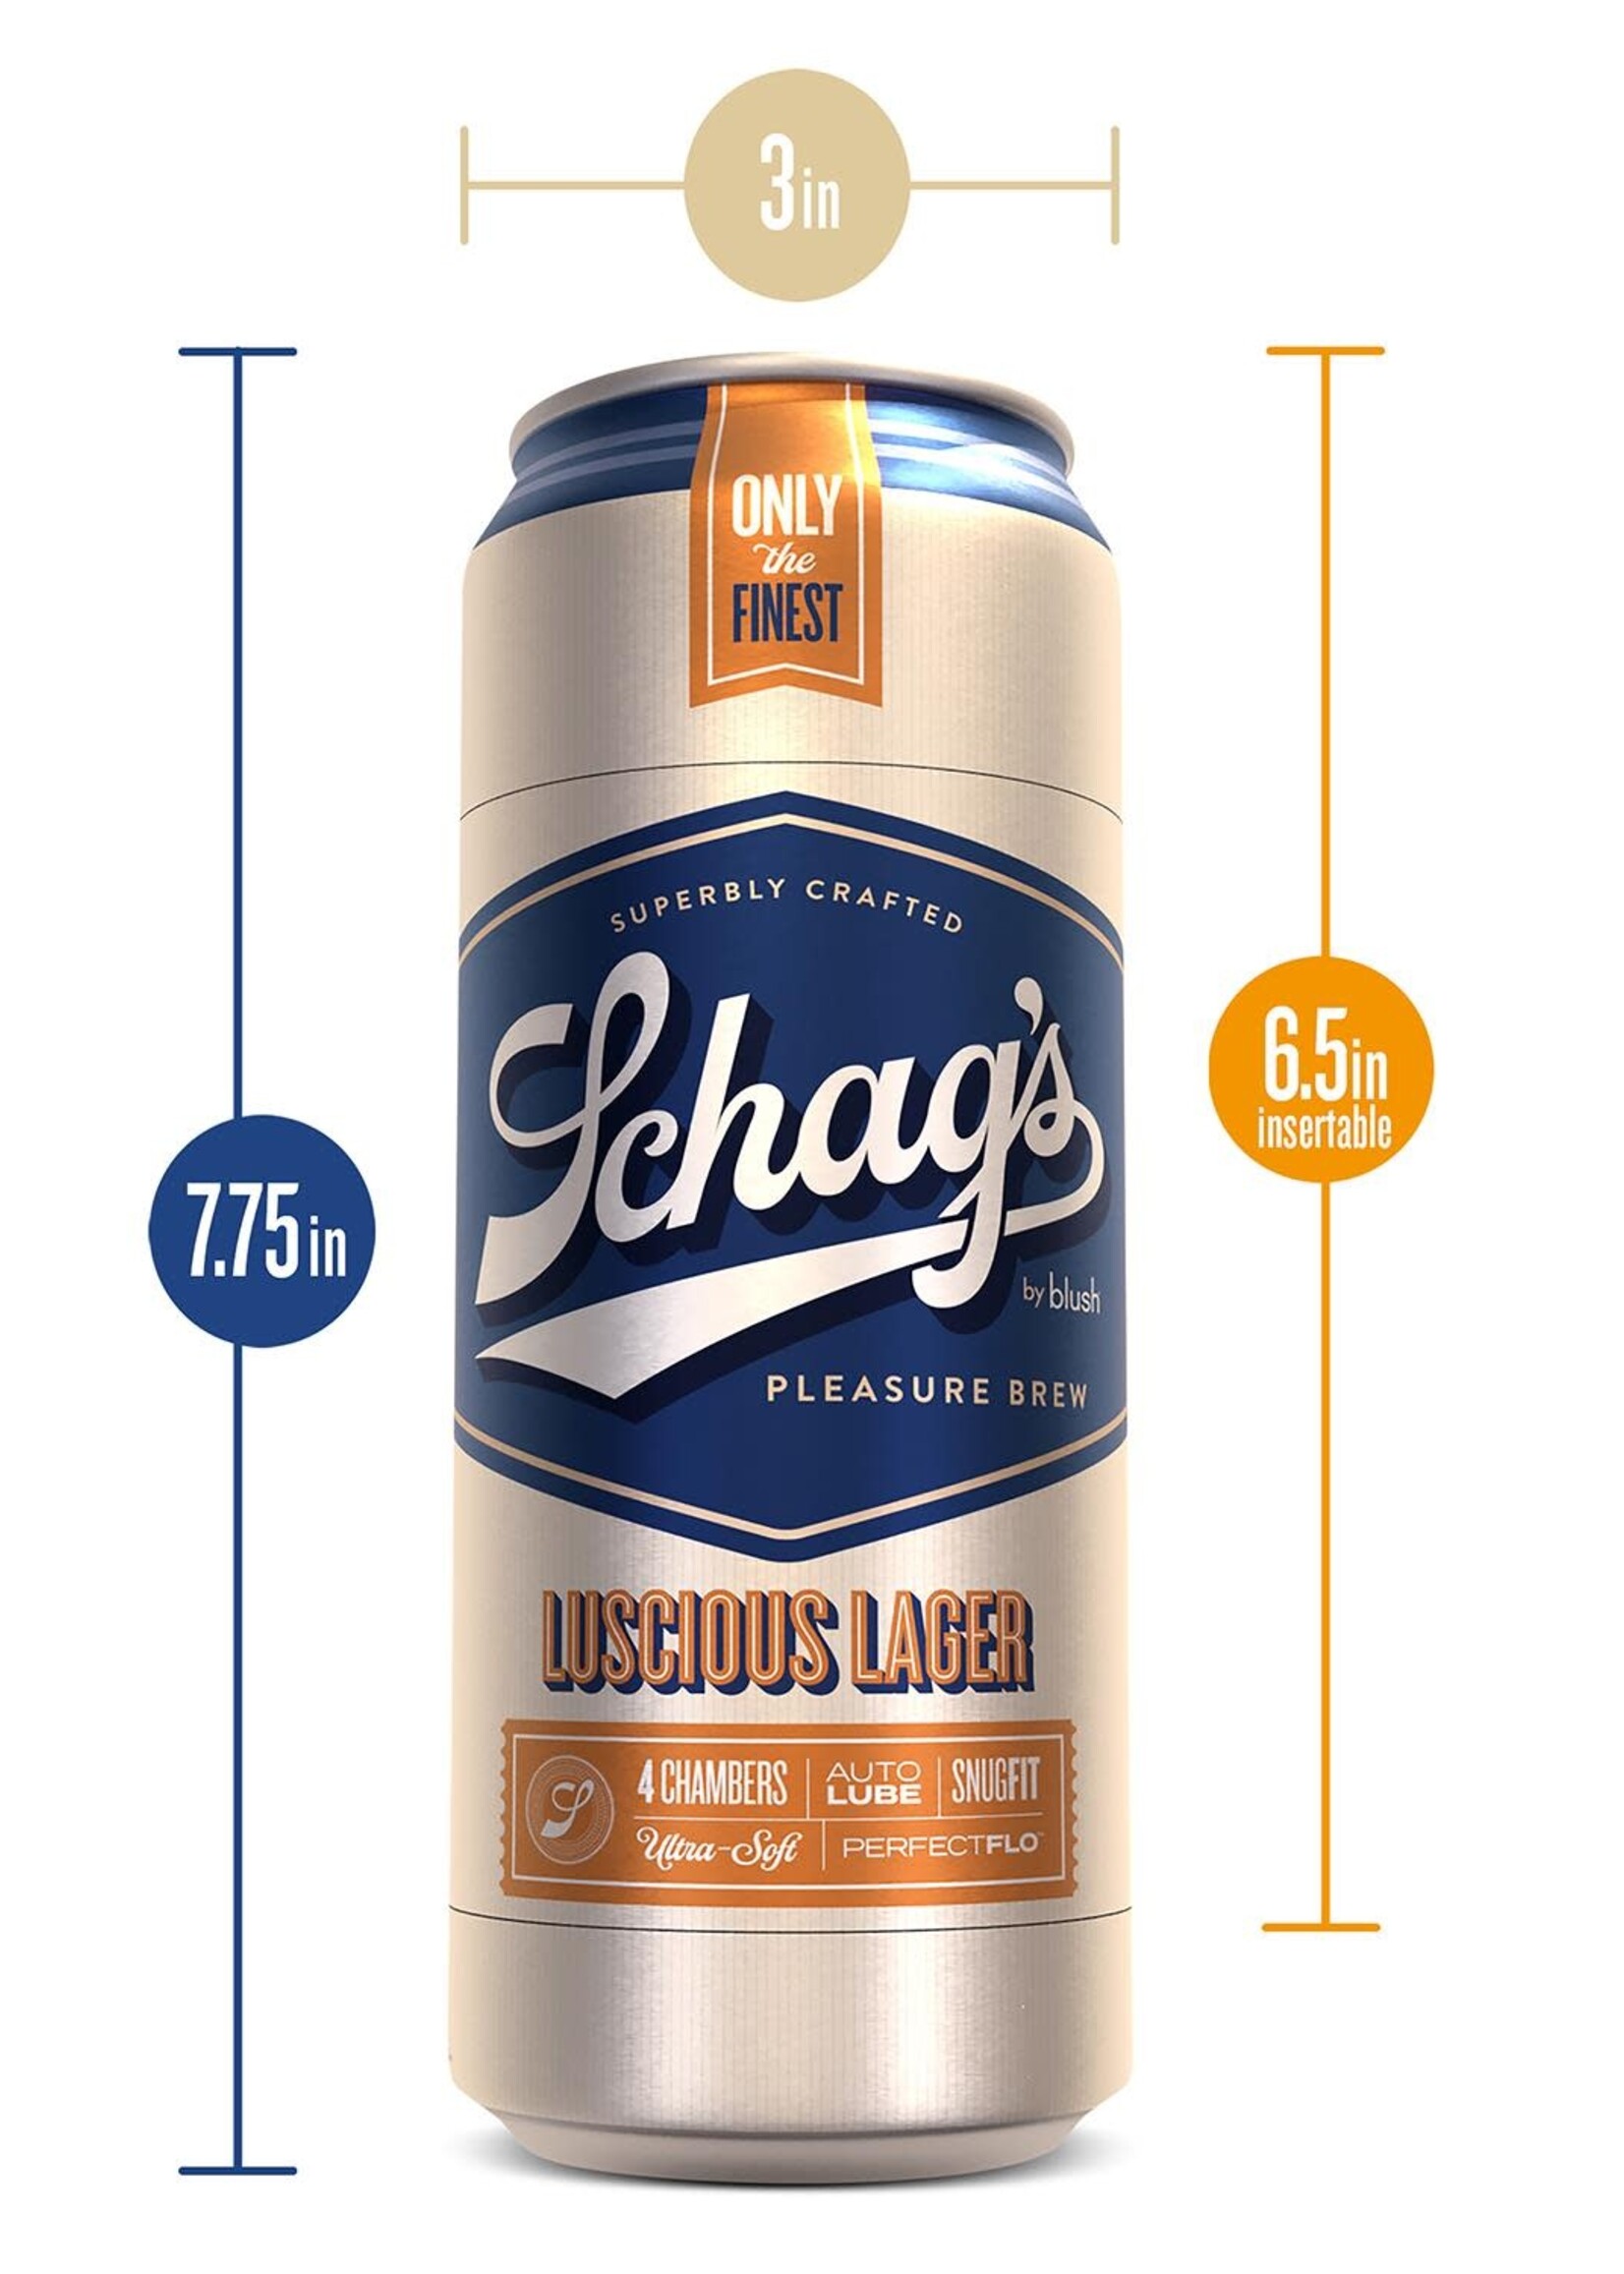 Blush Schag's luscious lager frosted